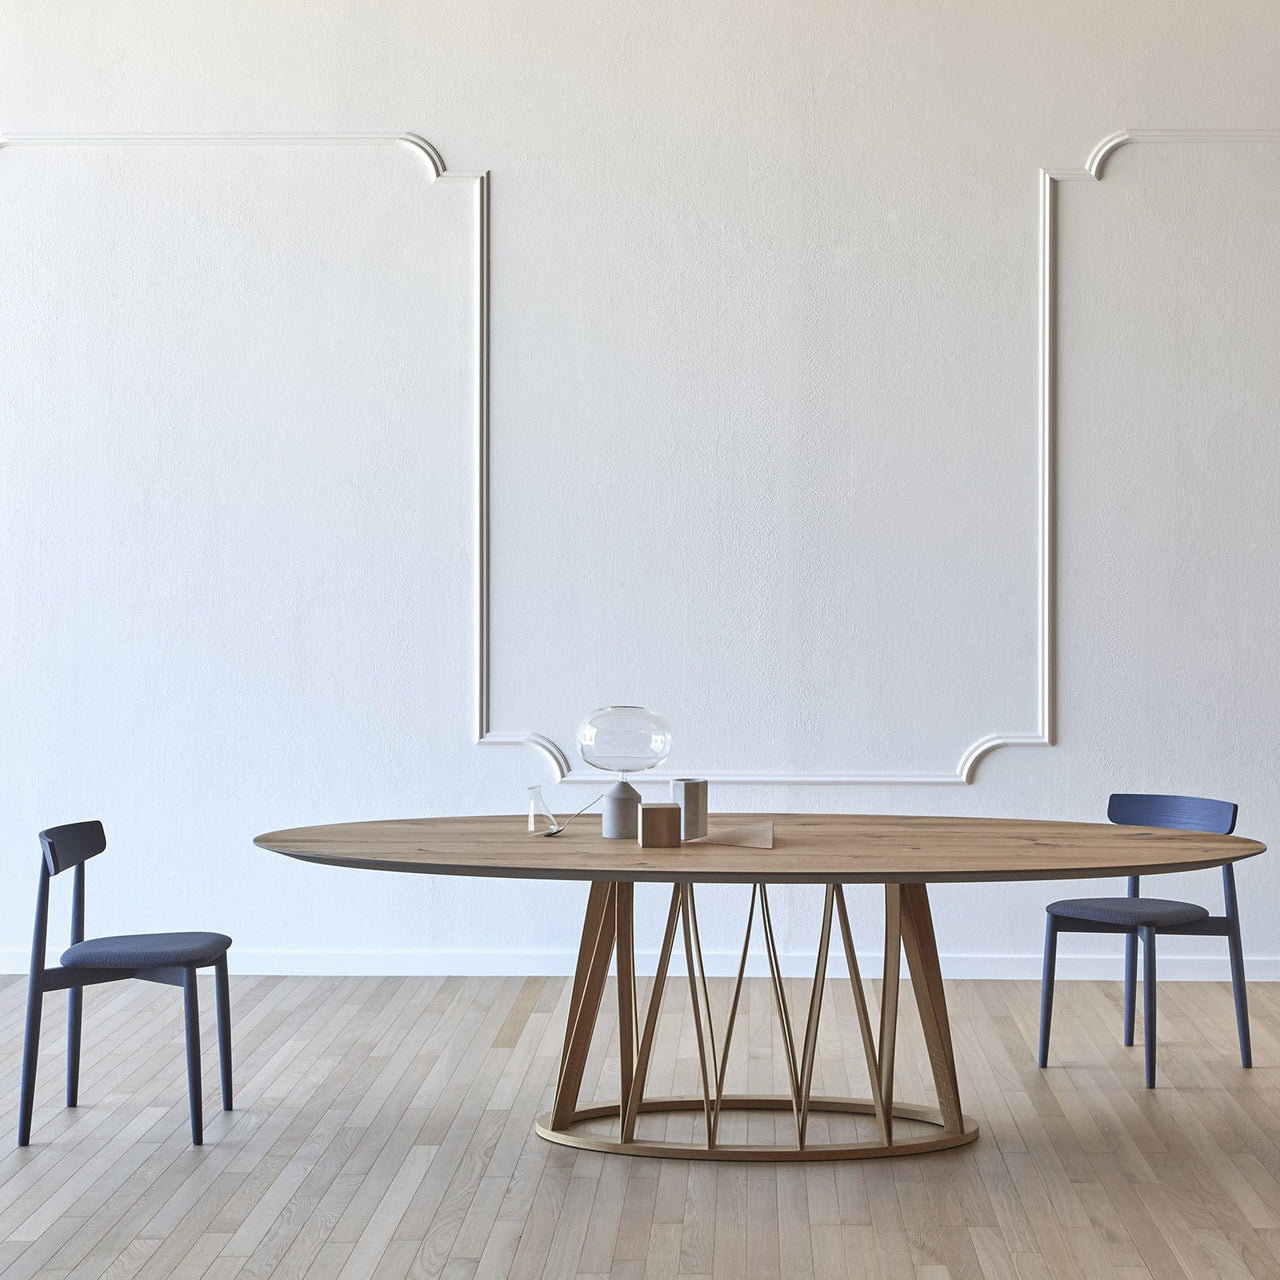 Acco Oval Dining Table: Small